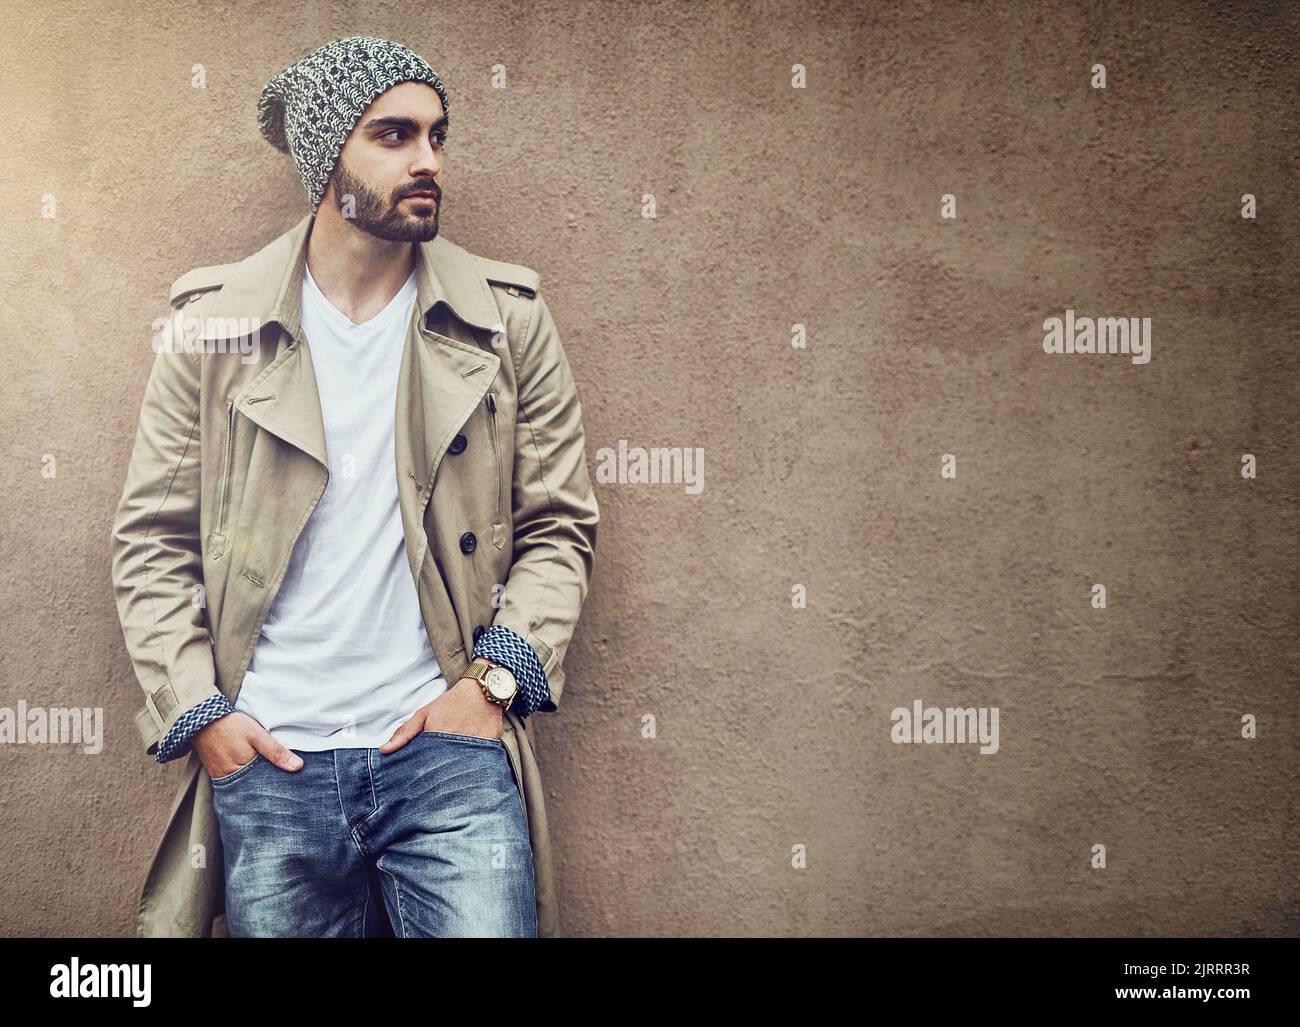 Nothing completes streetwear style than swag. a fashionable young man wearing urban wear and posing against a brown wall. Stock Photo